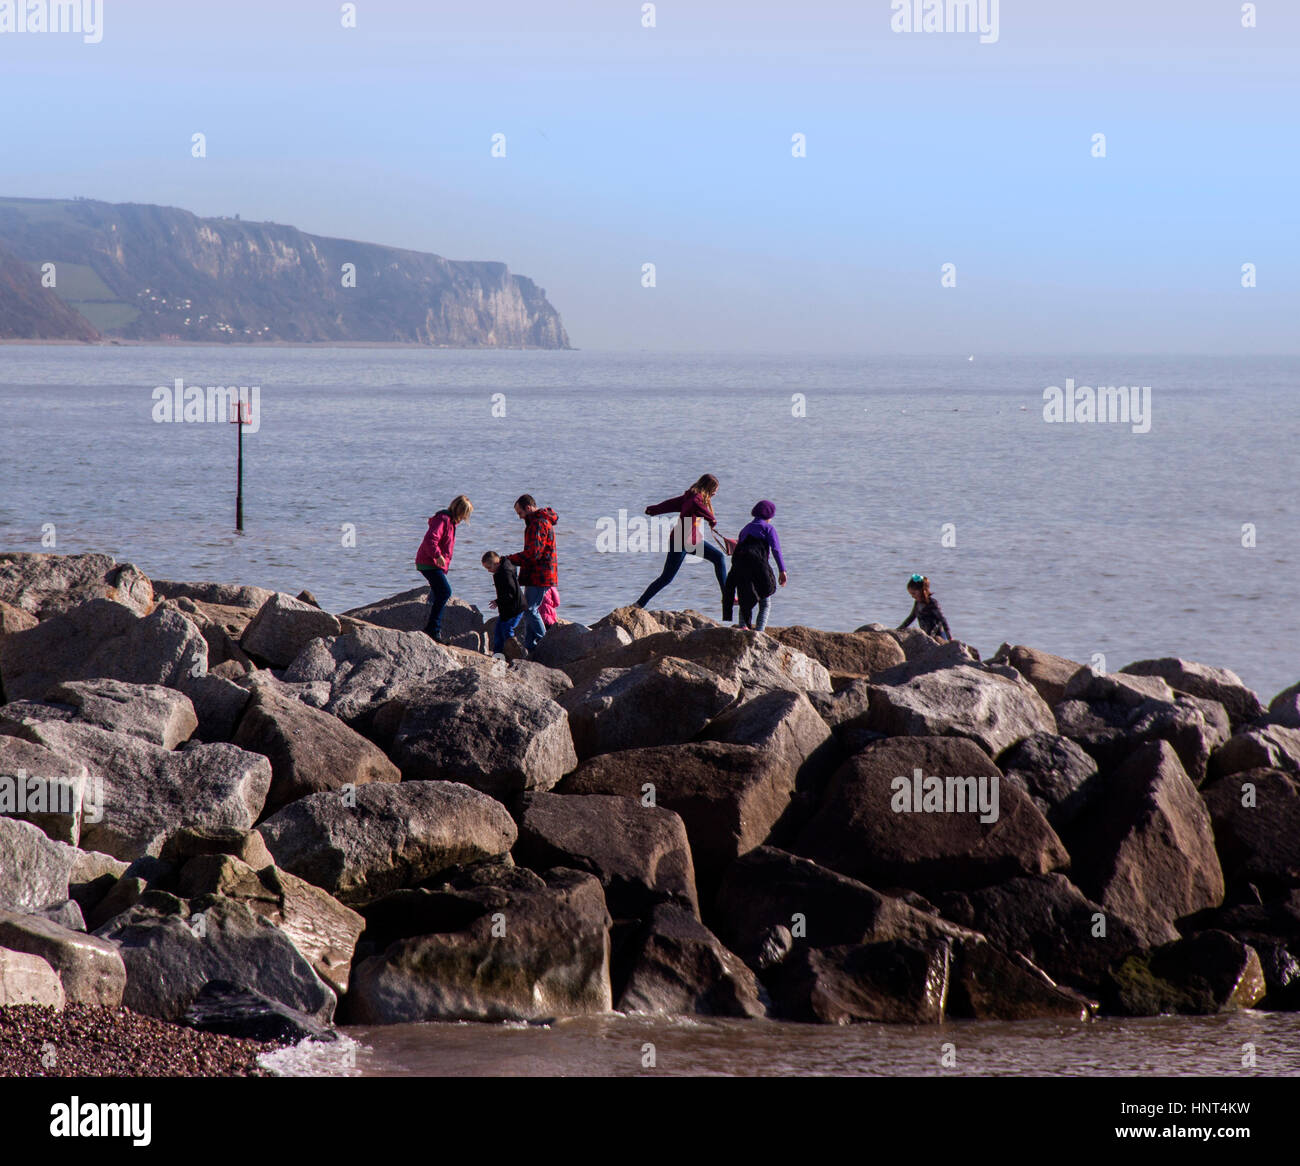 Sidmouth, Devon, UK. 16th Feb 2017. Half term playtime on the rock groynes at Sidmouth, Devon. Photo: South West Photos / Alamy Live News Stock Photo